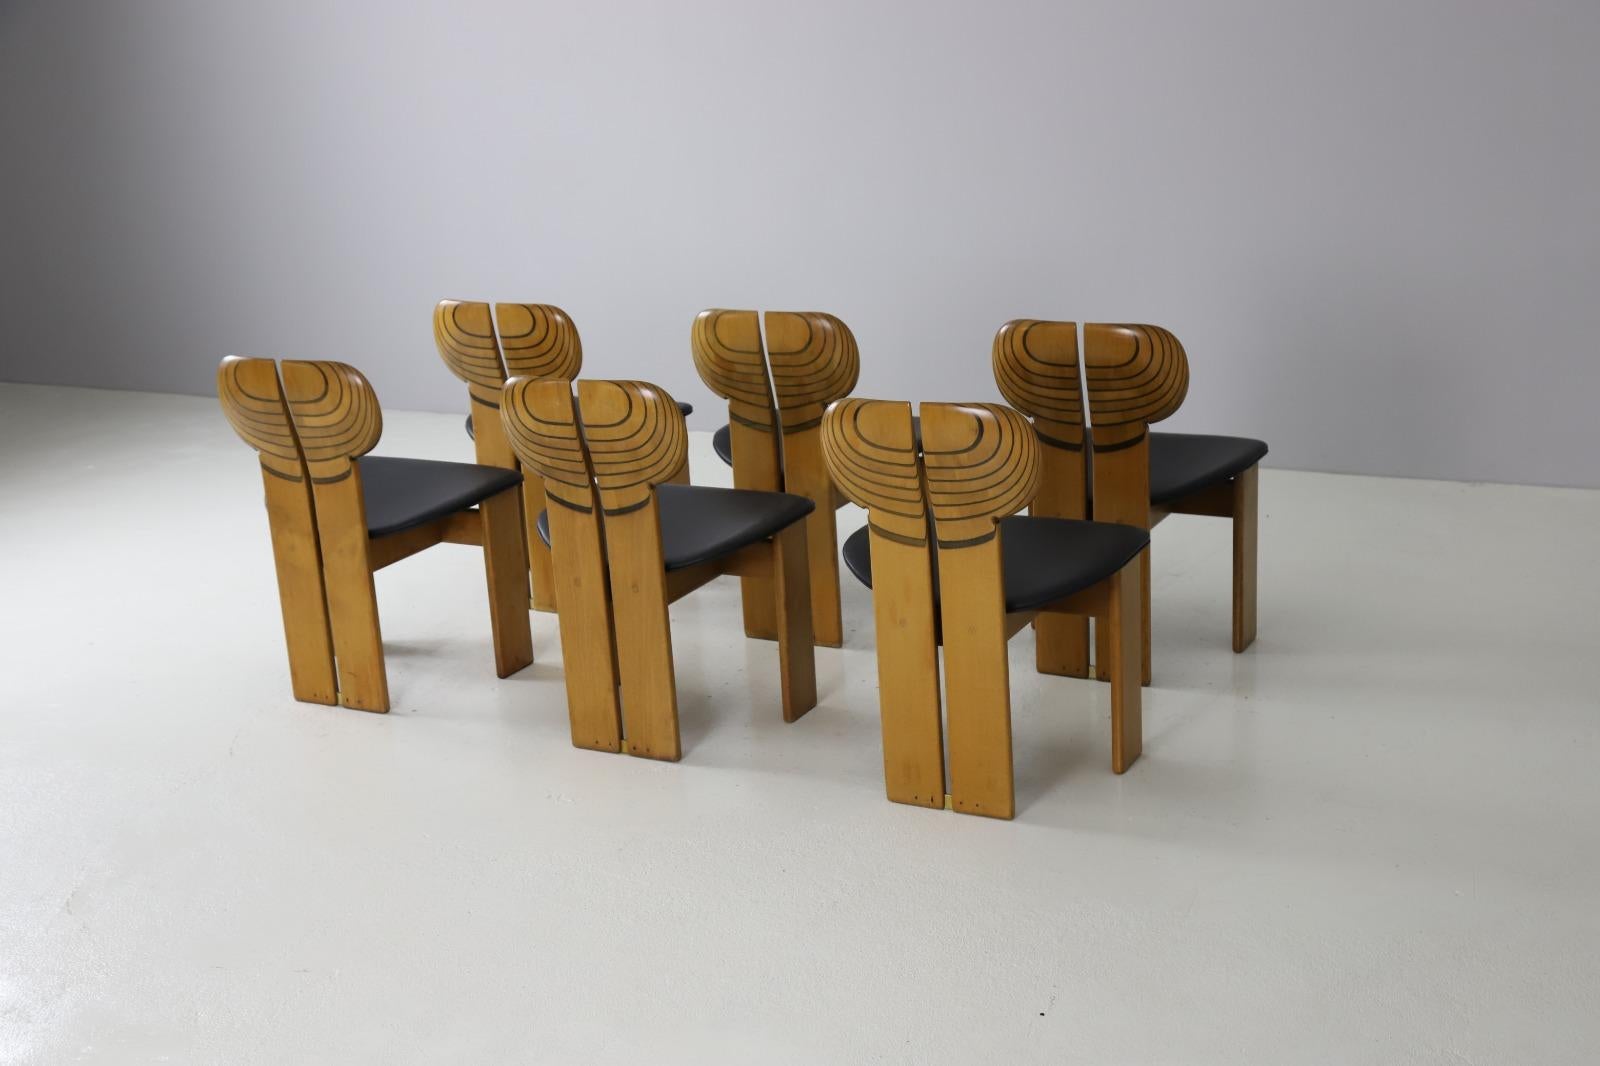 Inlay Set of 6 'Africa' Chairs by Afra & Tobia Scarpa for Maxalto, Italy 1975